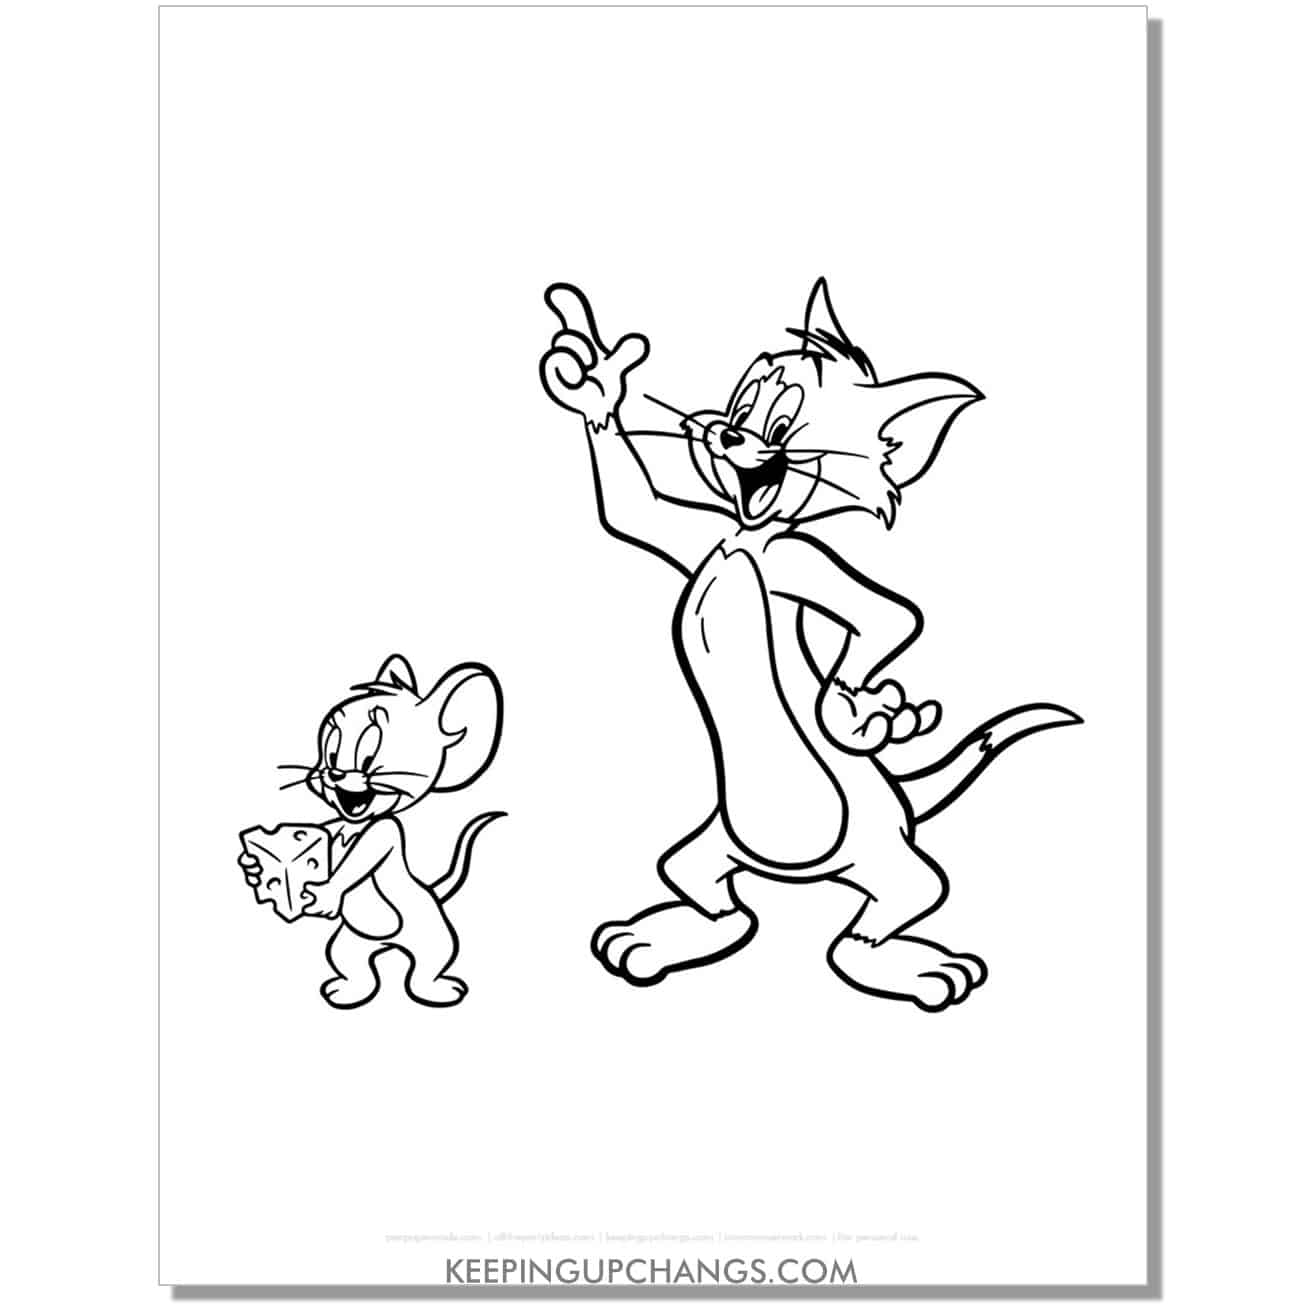 free tom and jerry posing coloring page.